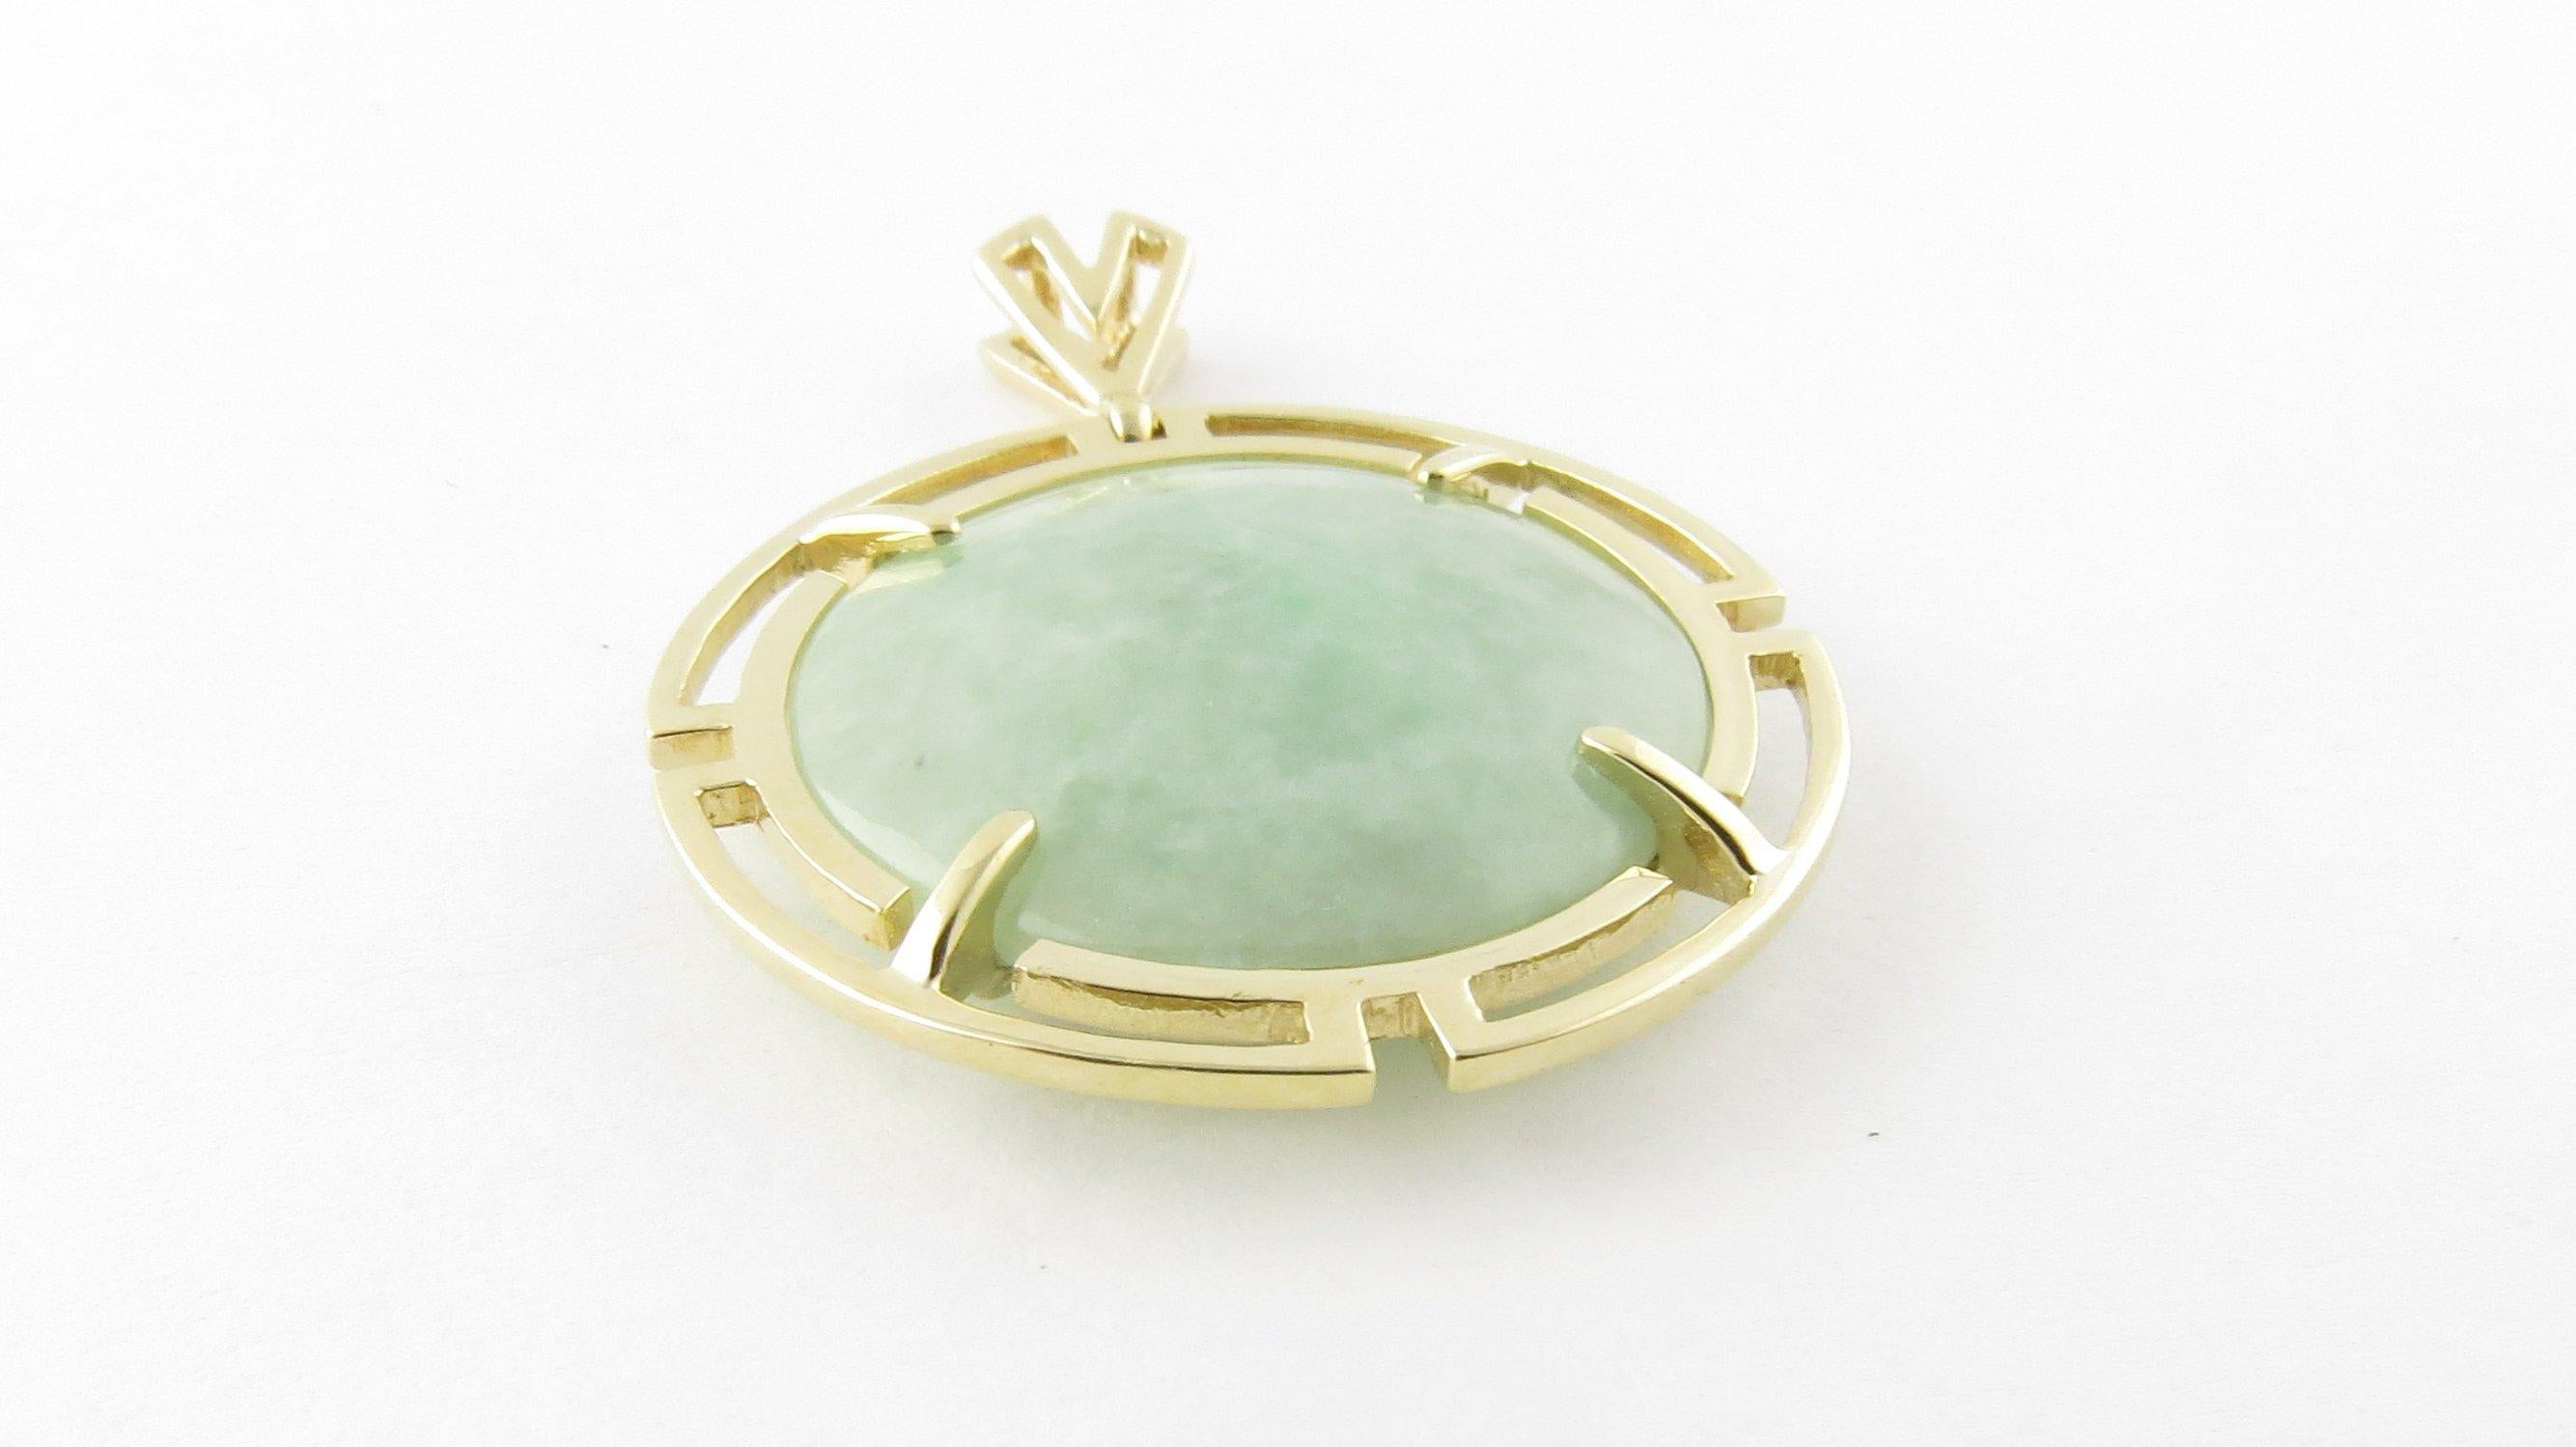 Vintage 14 Karat Yellow Gold and Jade Pendant- 
This lovely pendant features one round light green jade stone (21 mm) framed in beautifully detailed 14K yellow gold. 
Size: 37 mm x 29 mm 
Weight: 5.3 dwt. / 8.3 gr. 
Hallmark: HK 14K 
Very good